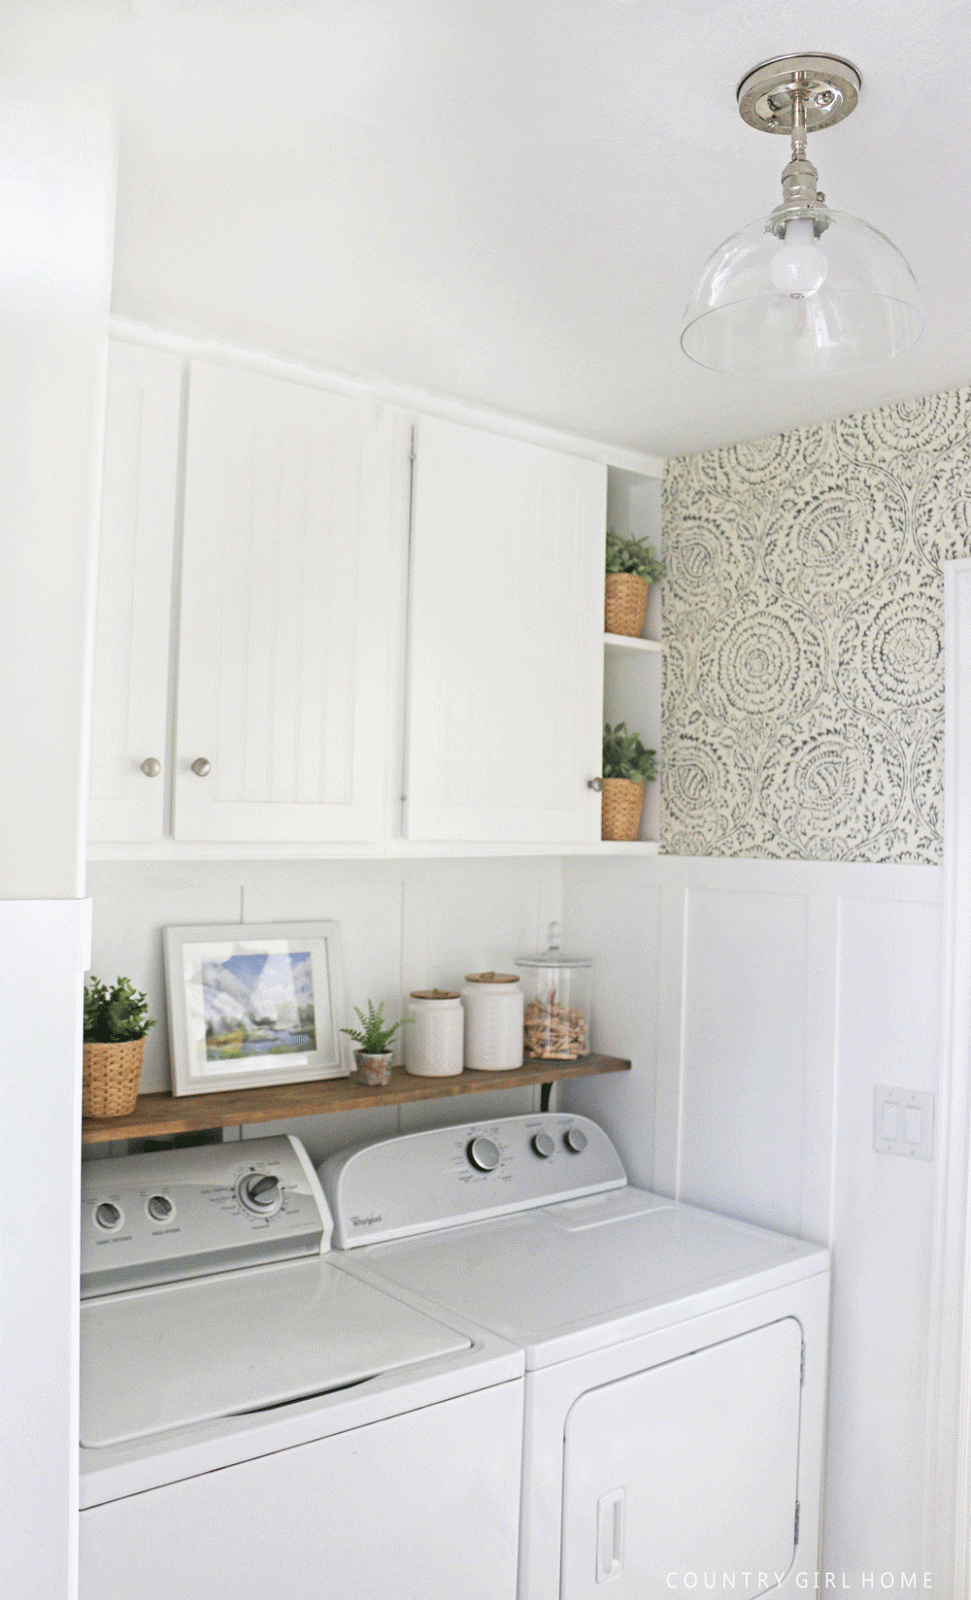 17 Laundry Room Wallpaper Ideas to Spruce Up the Drabness